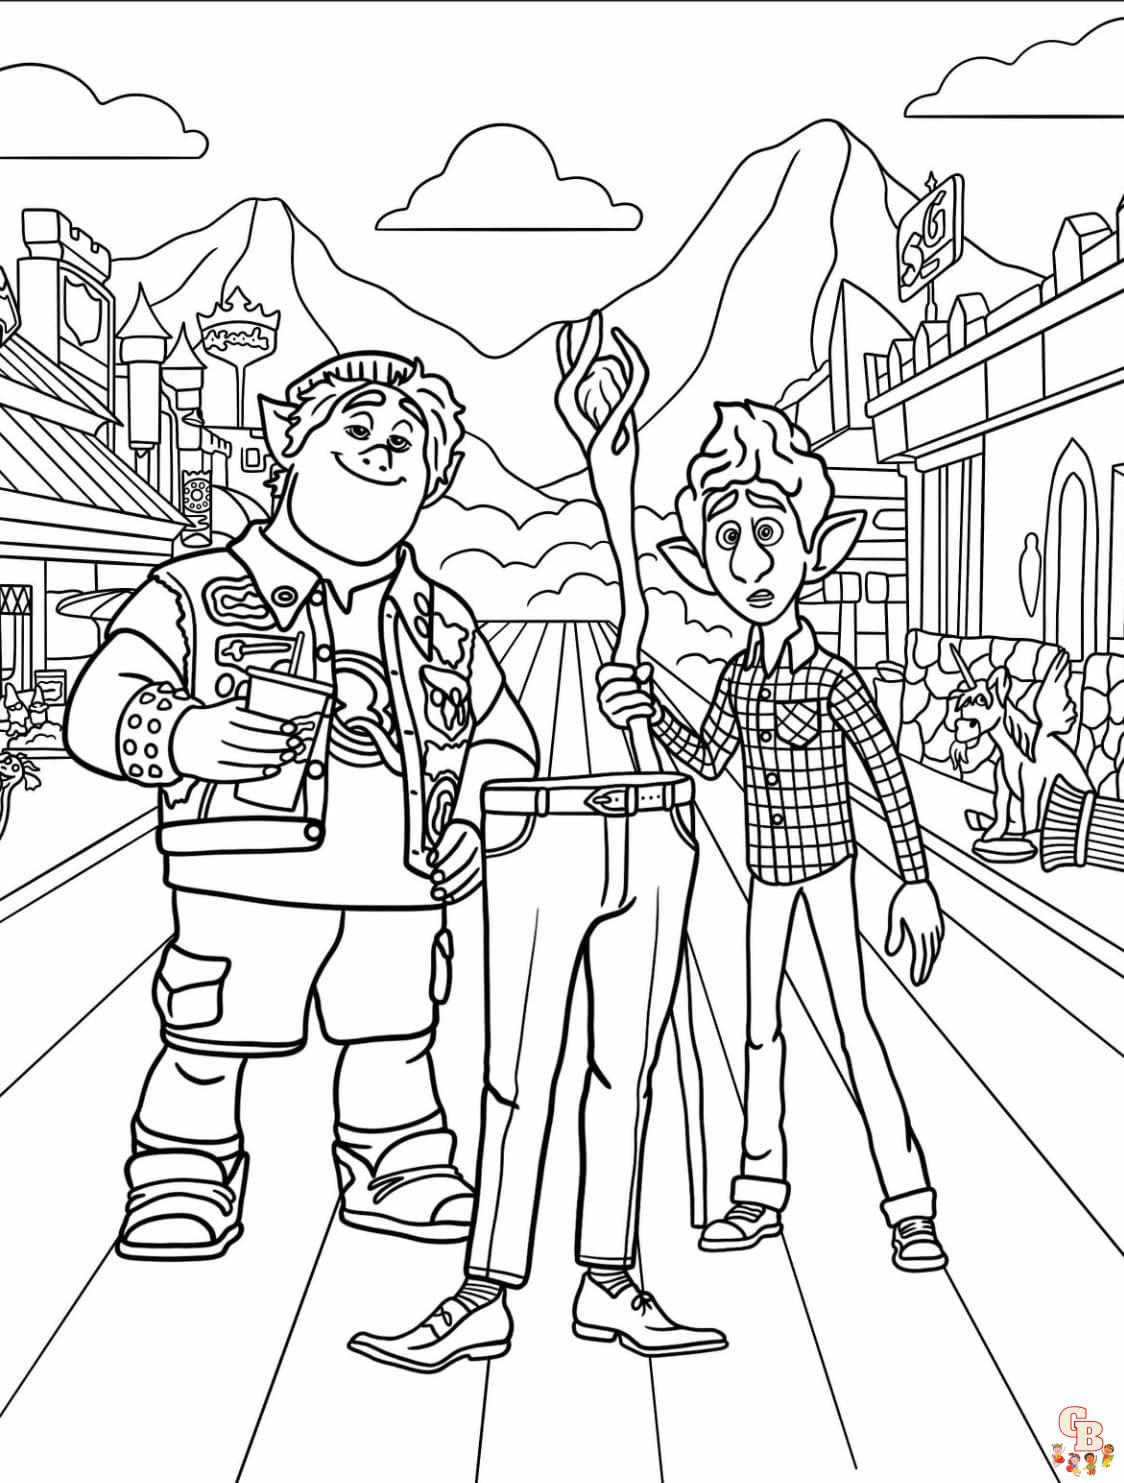 Onward coloring pages to print